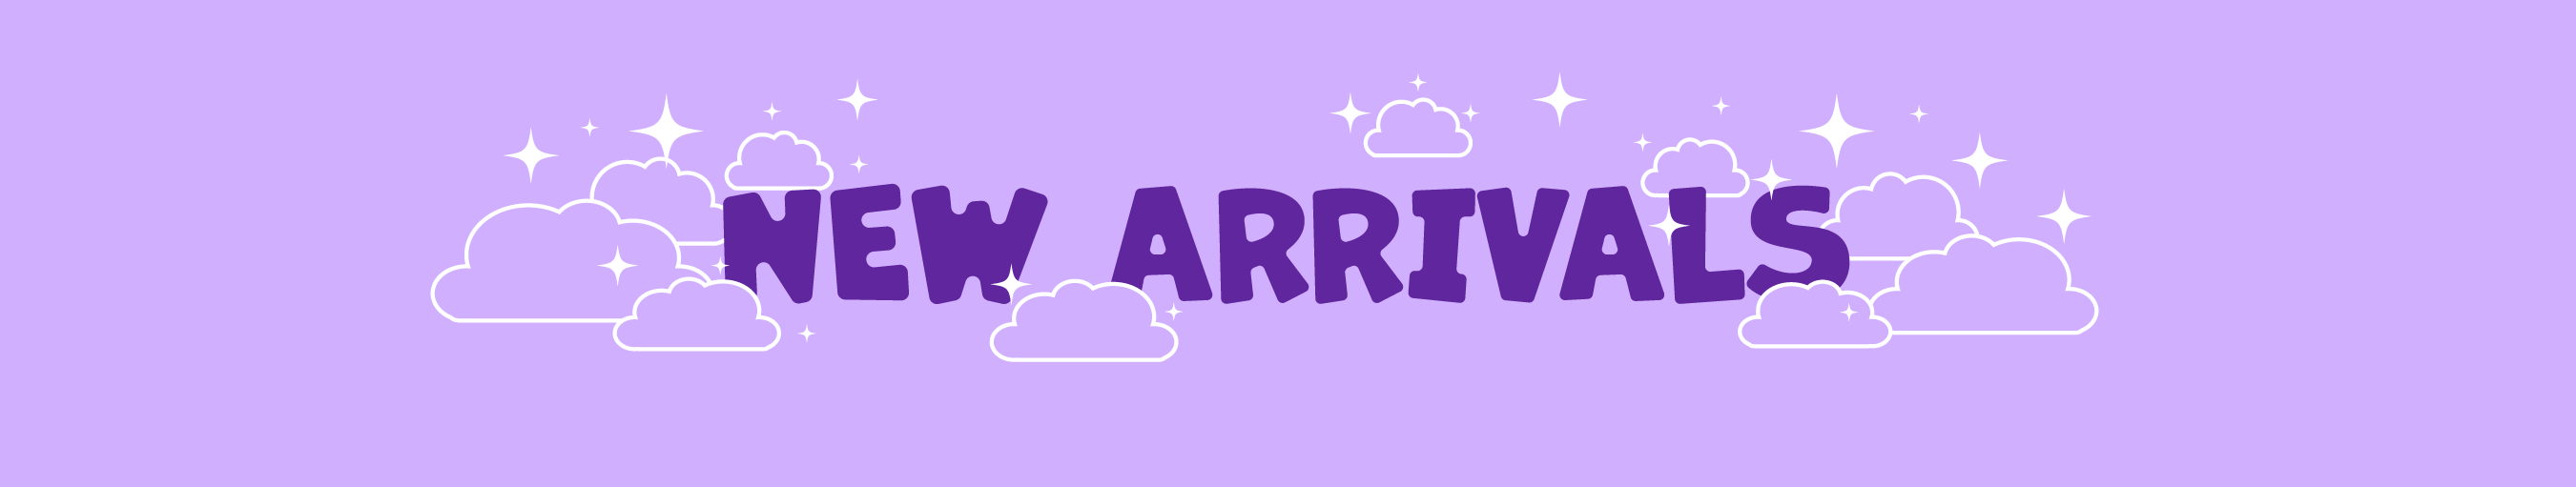 light purple background with white clouds and stars around purple text "New Arrivals" in all caps.